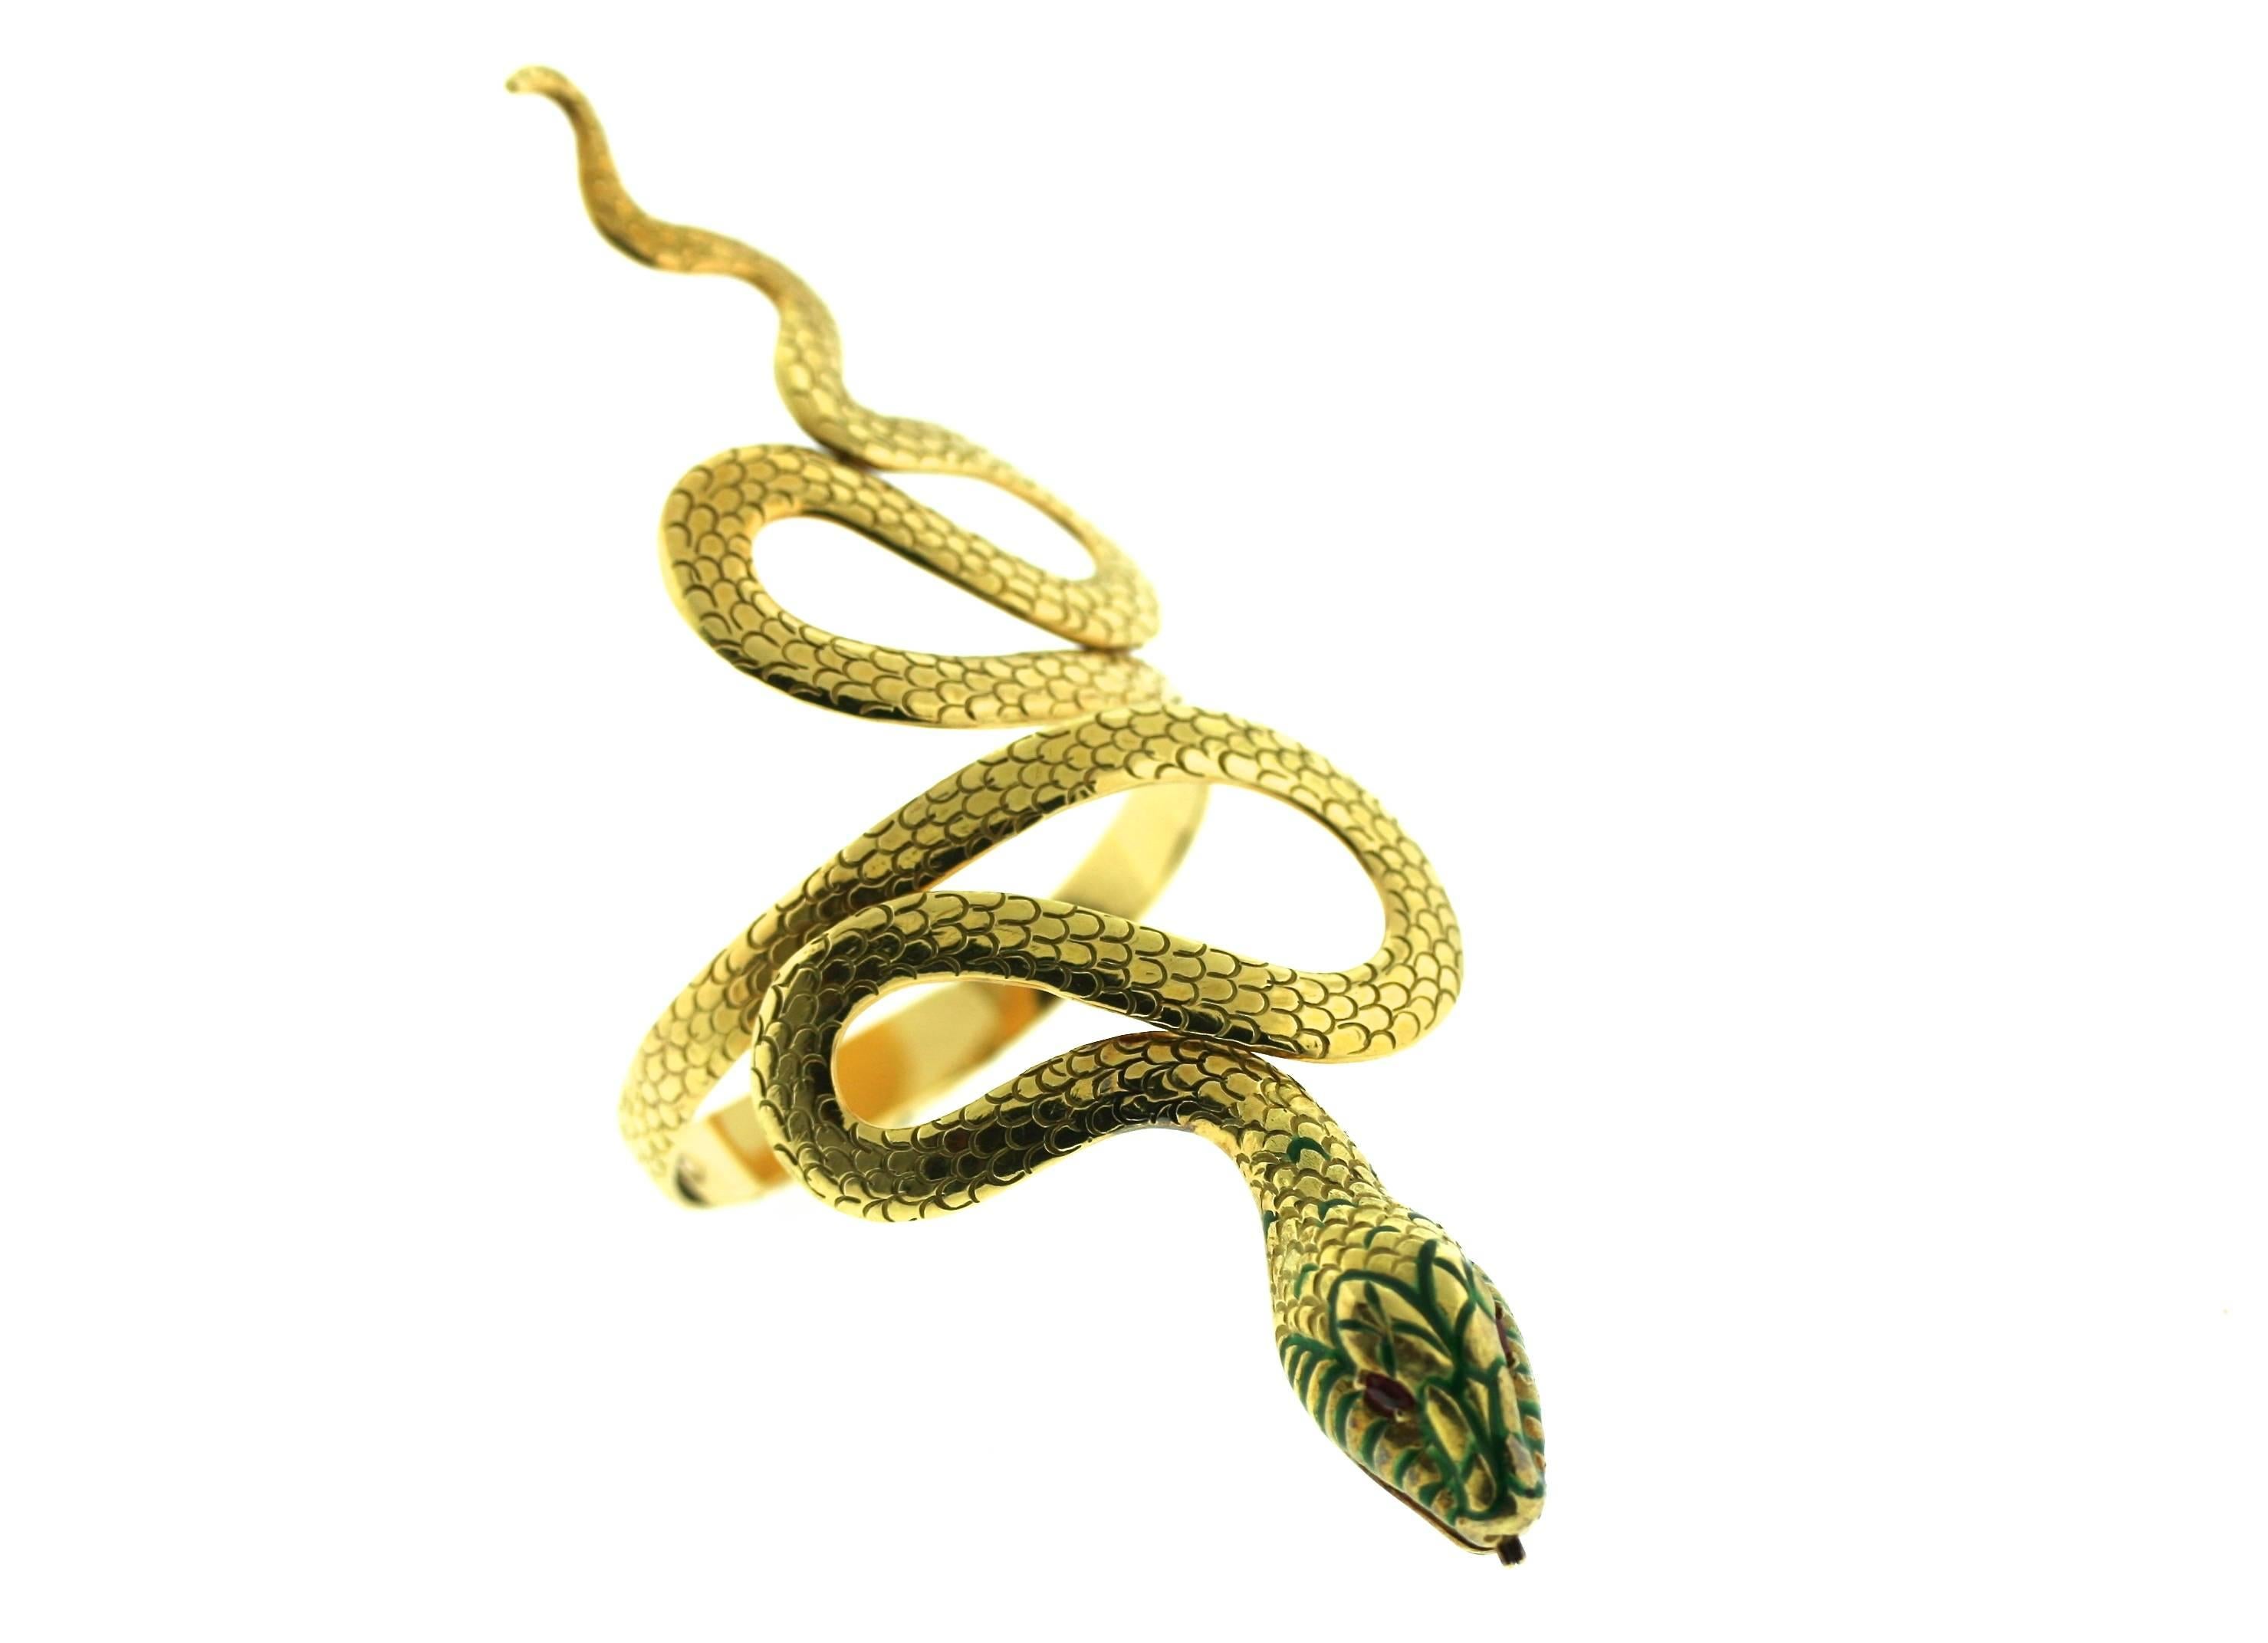 Spritzer and Fuhrmann 18k gold hinged serpent cuff with faceted ruby eyes and green enamel detail on the head. The body is engraved with scales all around. This is a wonderful statement bracelet measuring 5